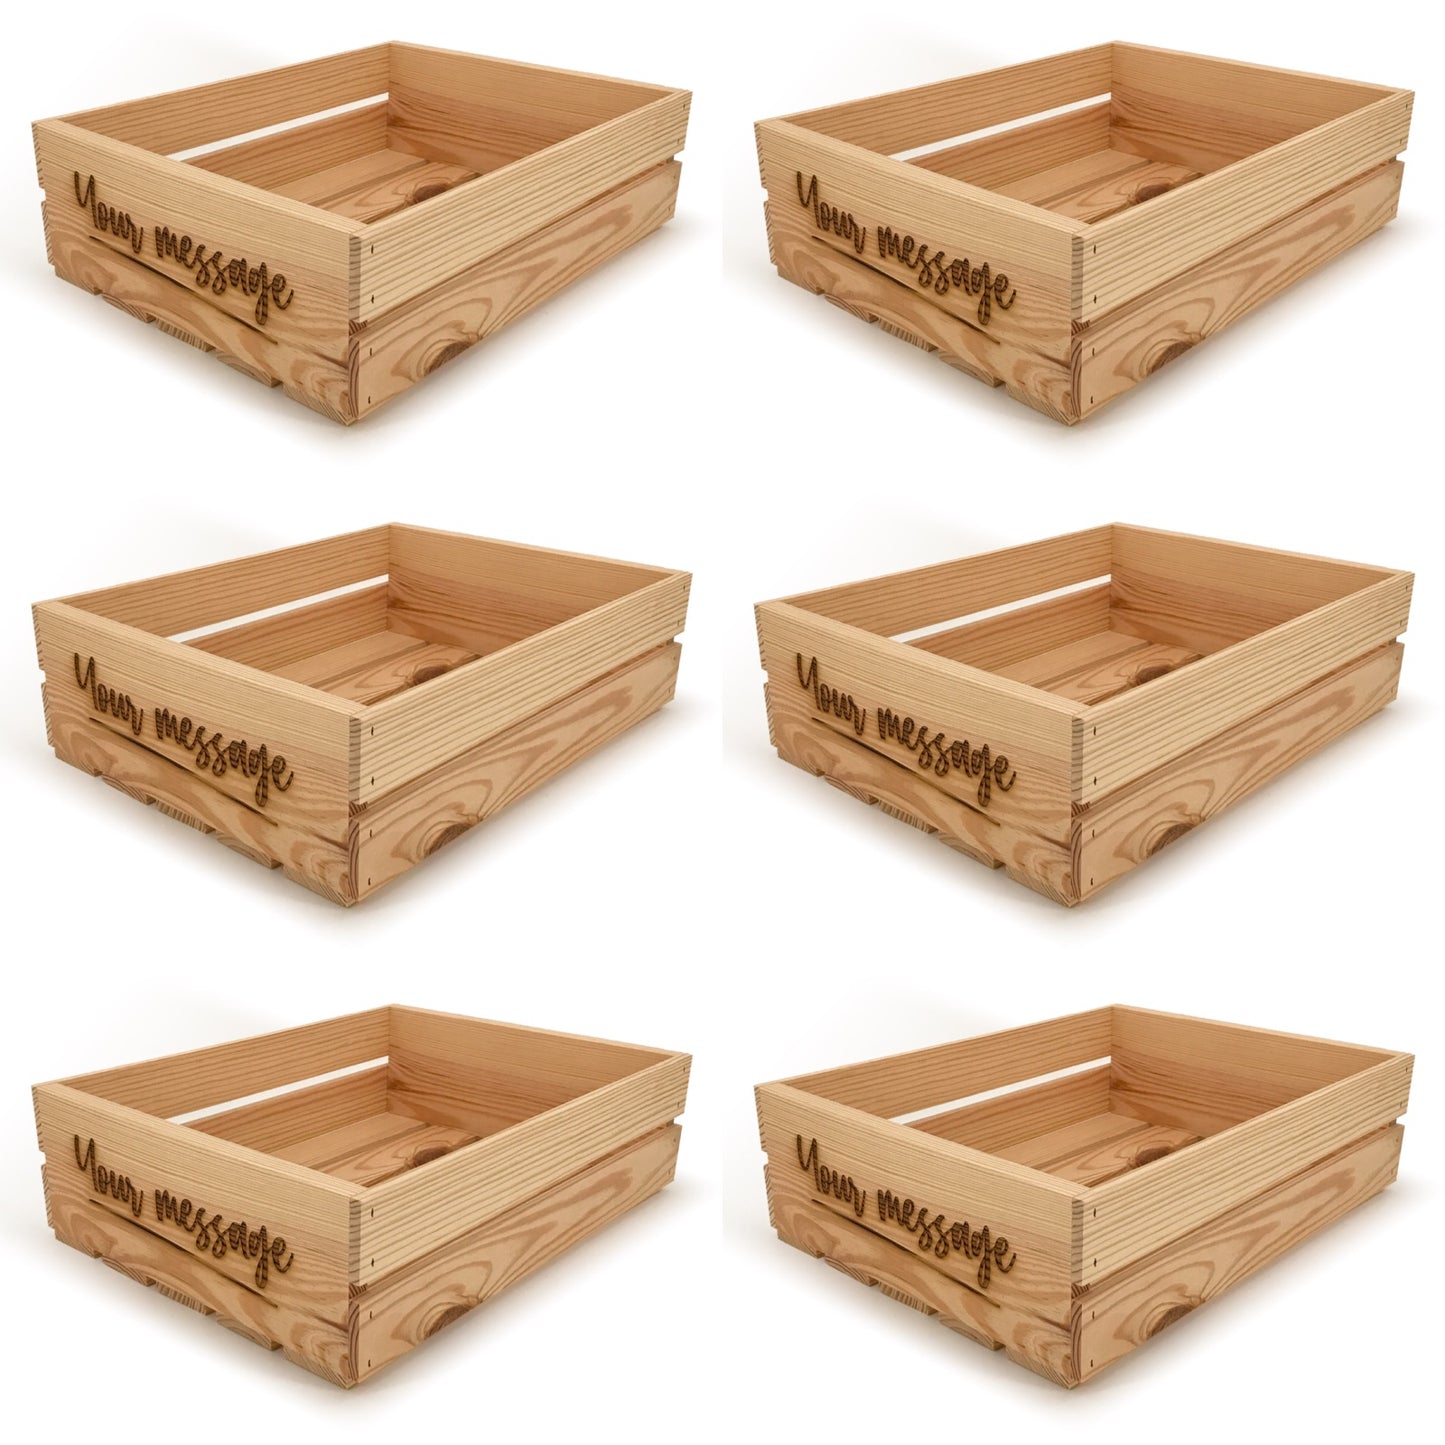 6 Small wooden crates with custom message 18x14x5.25